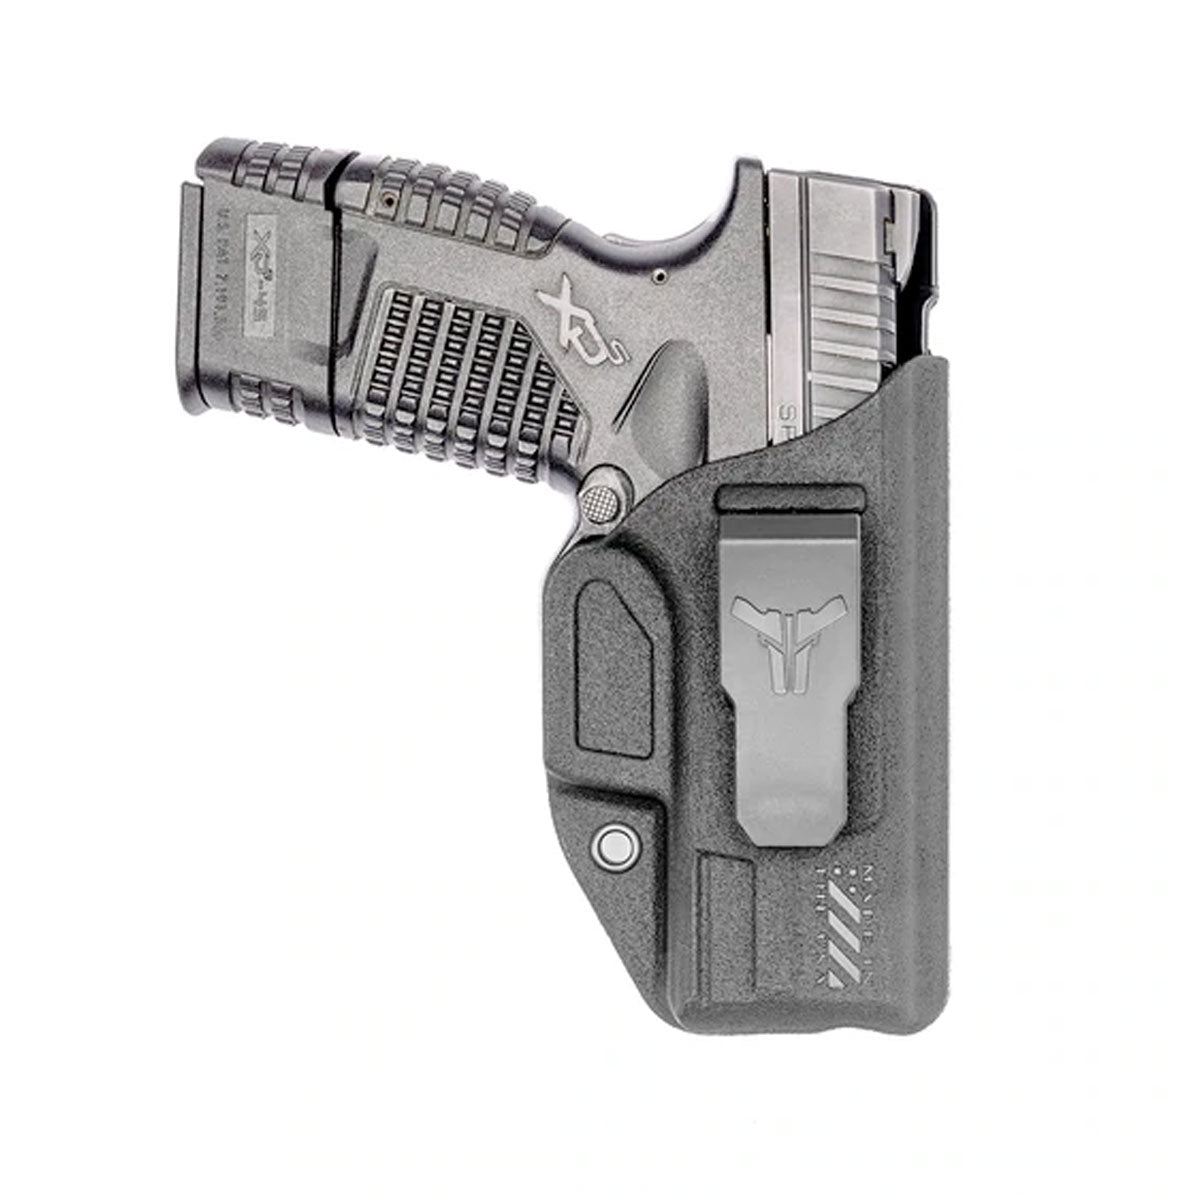 Blade-Tech Klipt IWB Holster Black Right Hand Only Holsters Blade-Tech Holsters Springfield XDS 3.3: Mod 1/2 Tactical Gear Supplier Tactical Distributors Australia